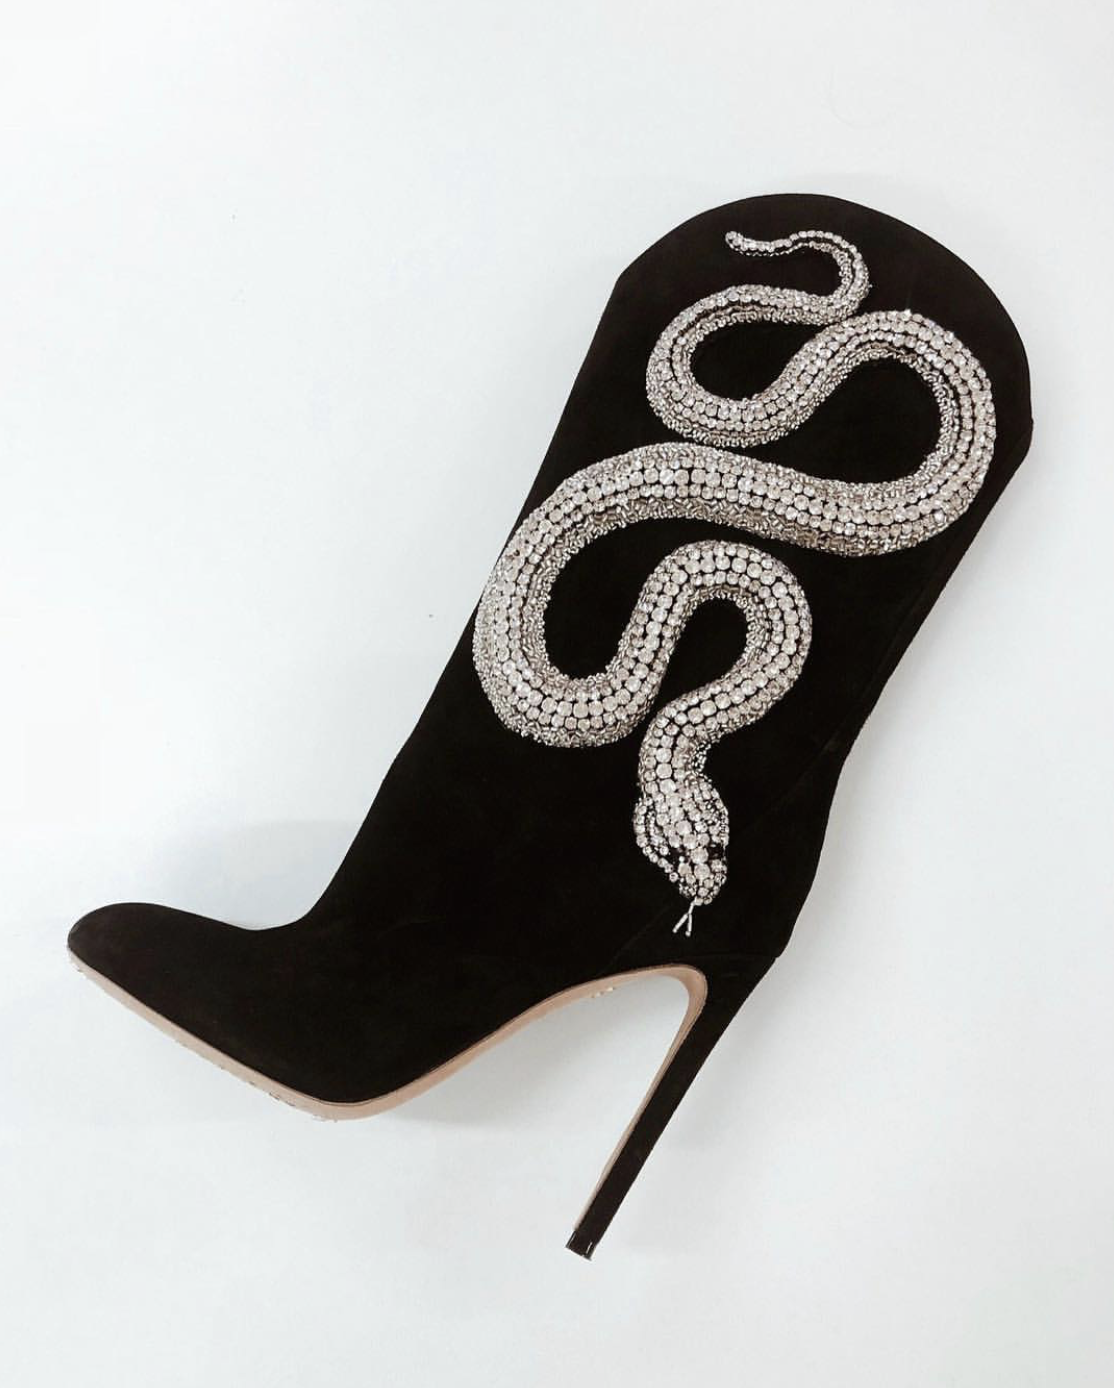 Bomb_Product_of_the_Day_Giambattista_Valli_Crystal_Snake_Boots